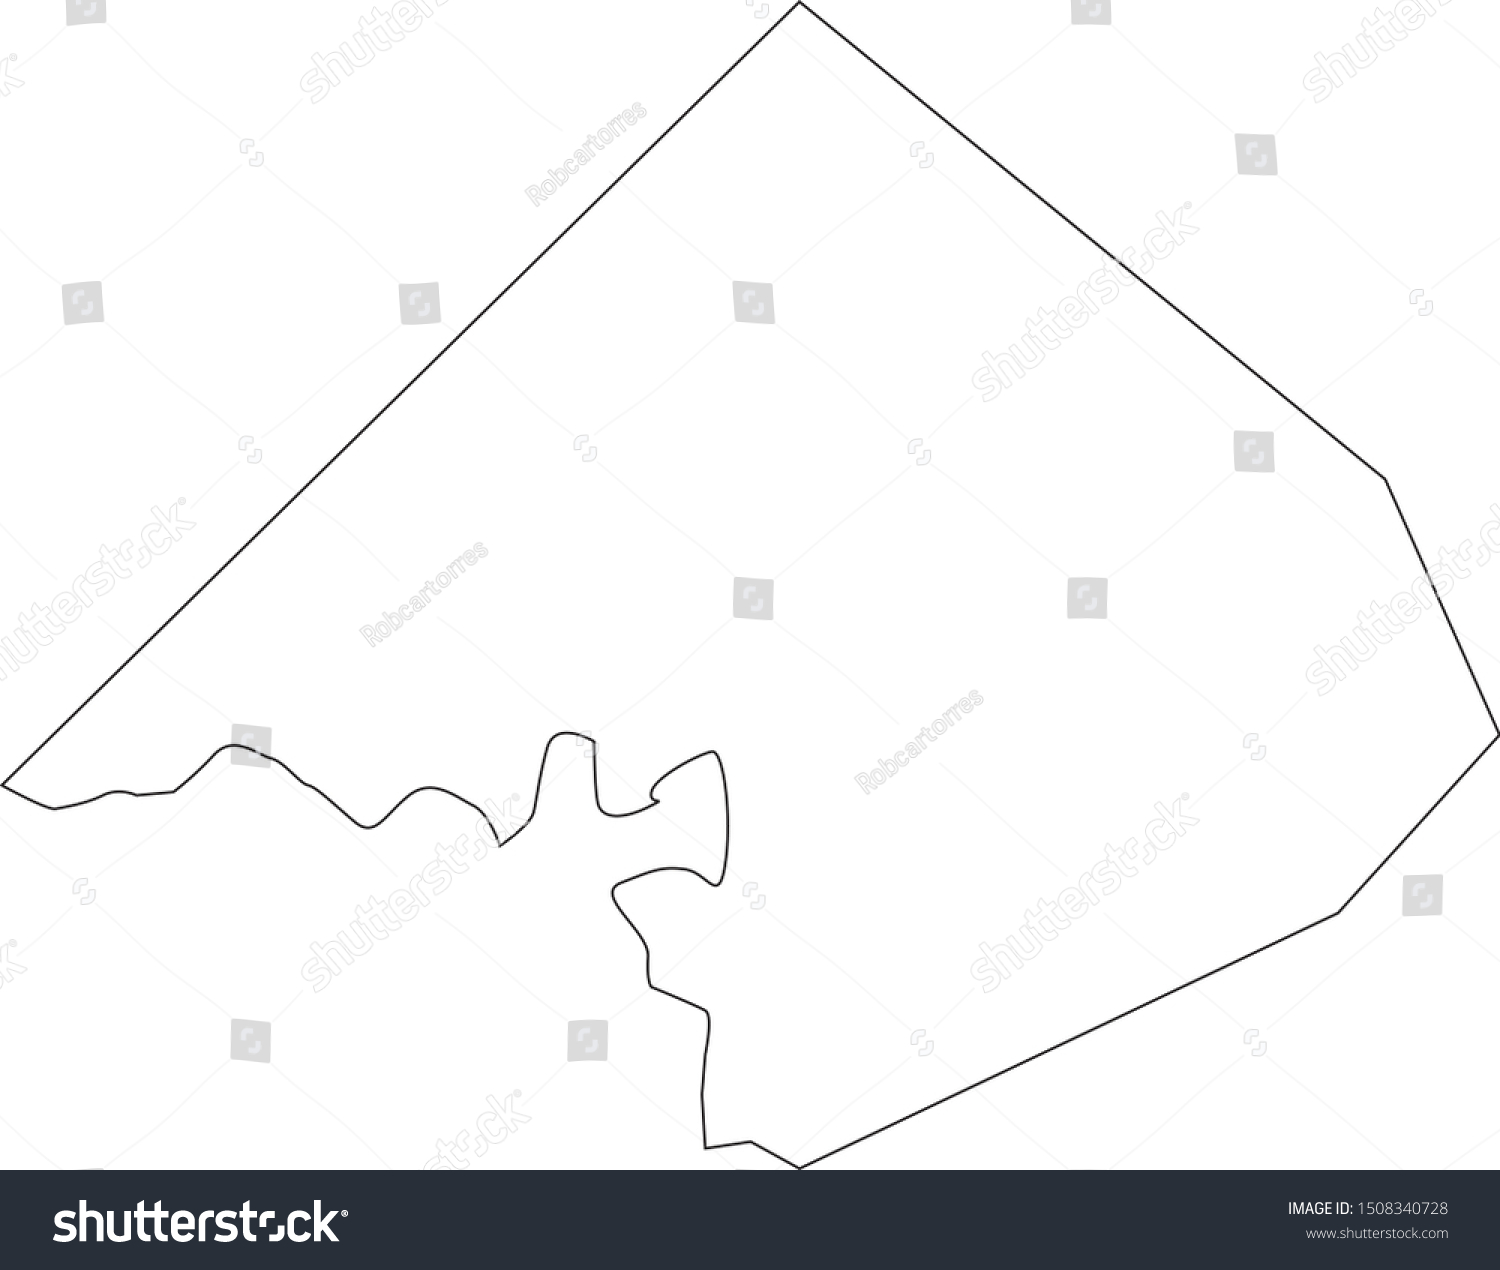 Comal County Map State Texas Stock Vector Royalty Free 1508340728 Shutterstock 0225